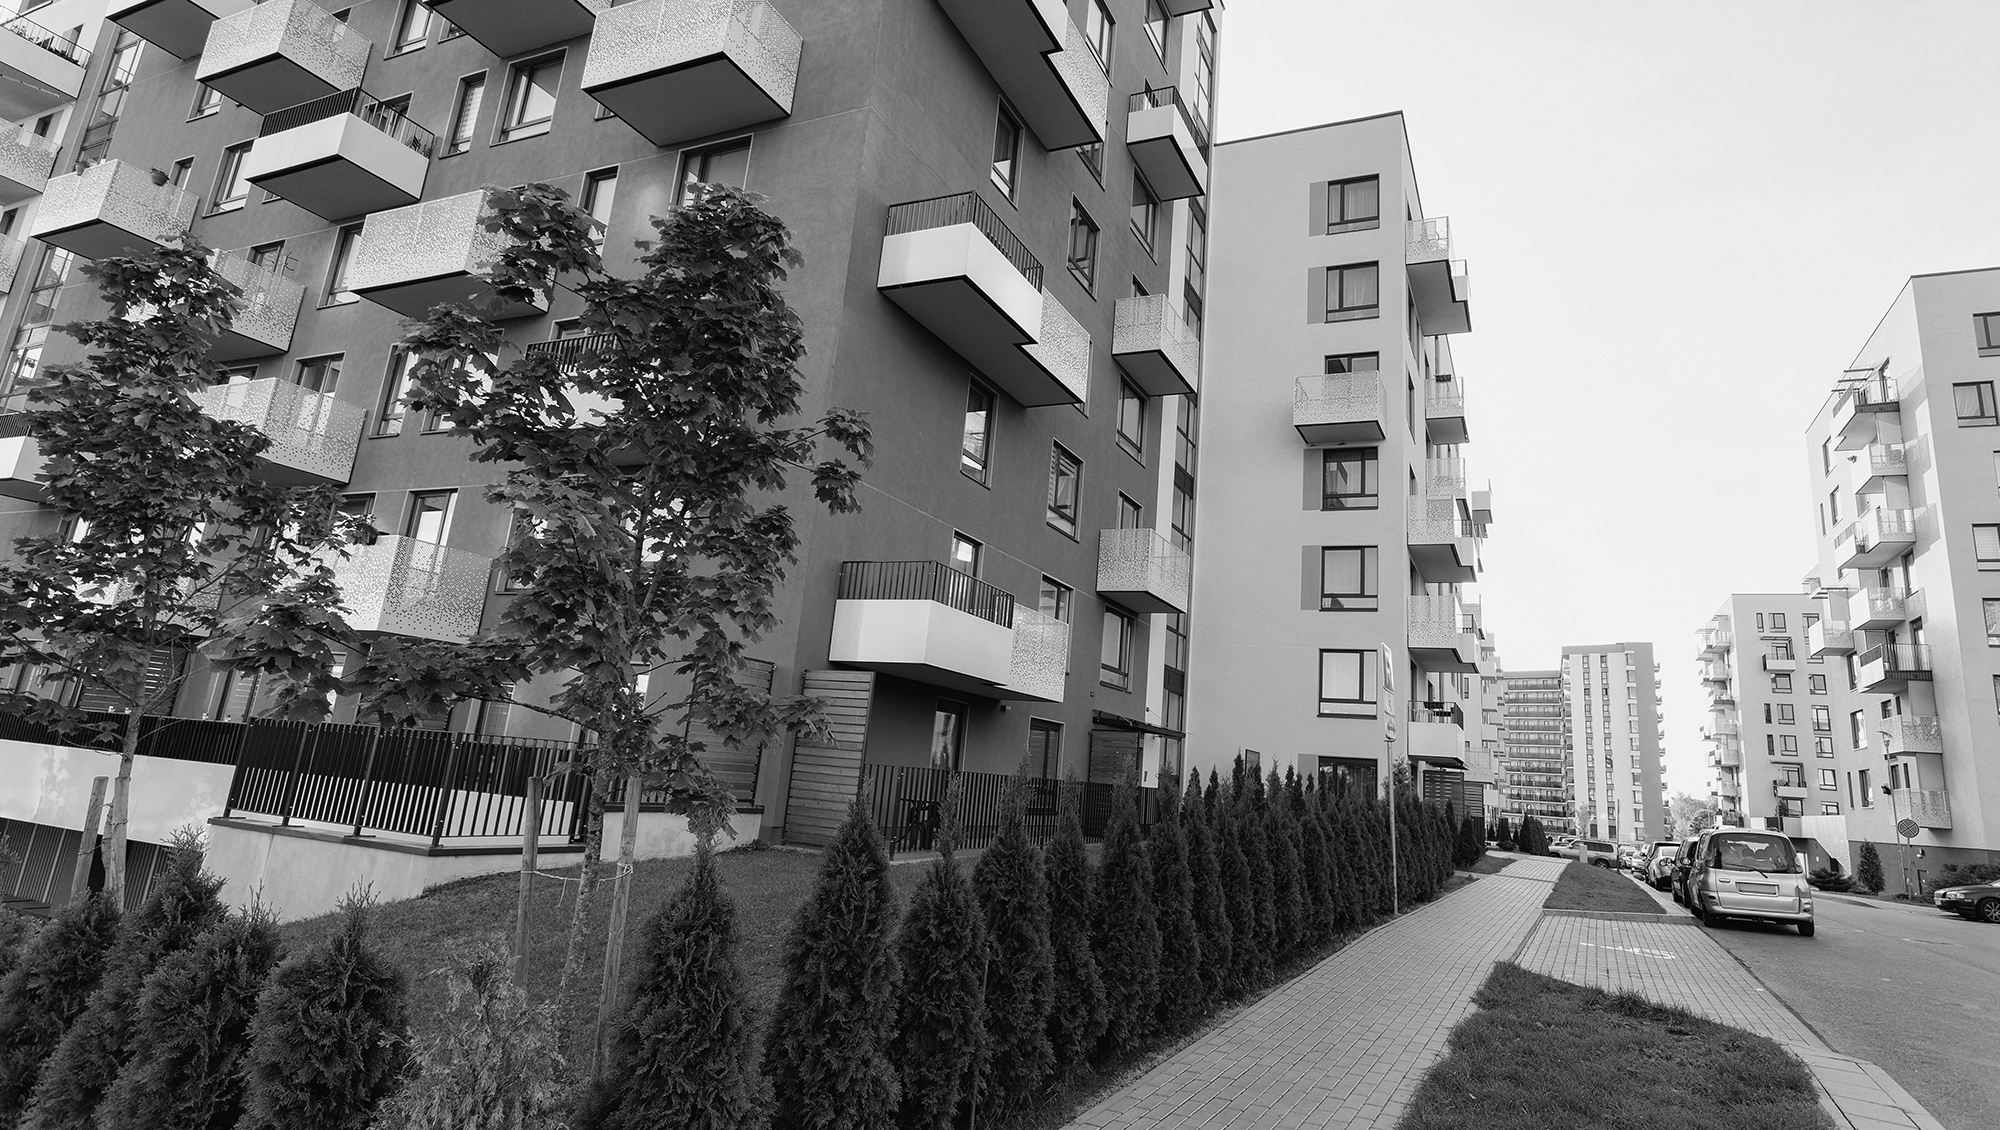 Apartment building in black and white